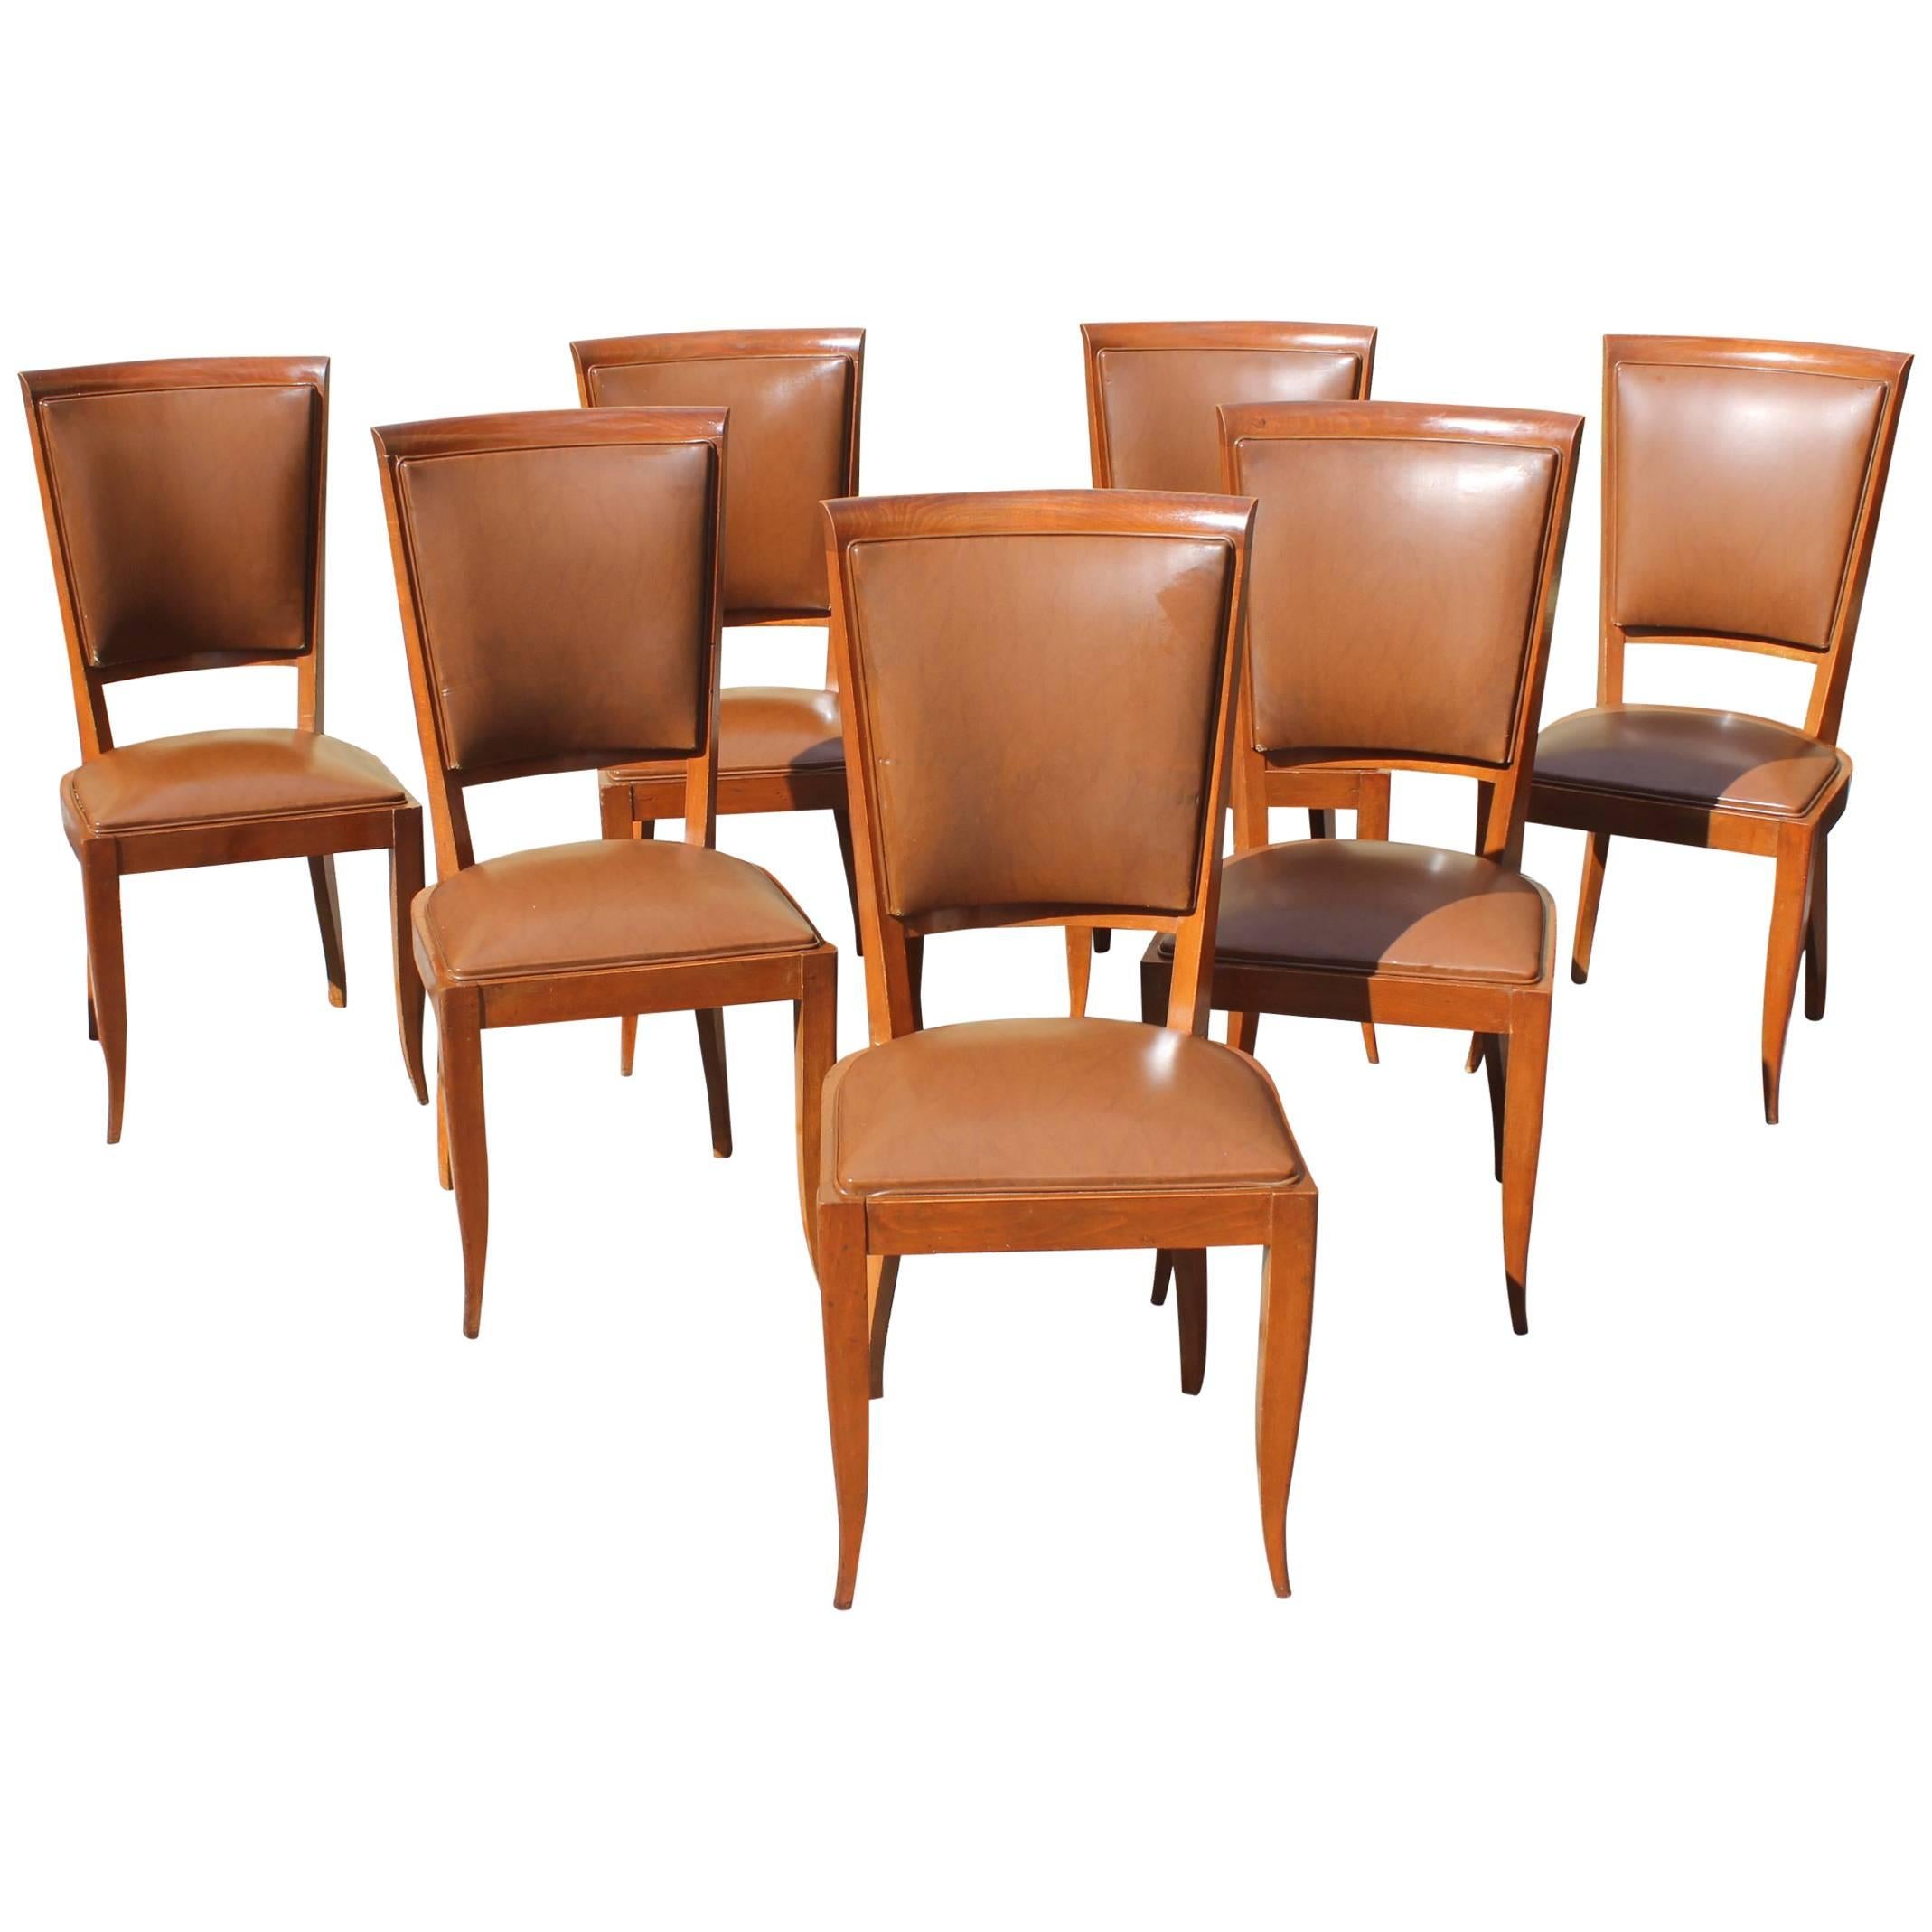 Classic Set of Seven French Art Deco Solid Mahogany Dining Chairs, circa 1940s